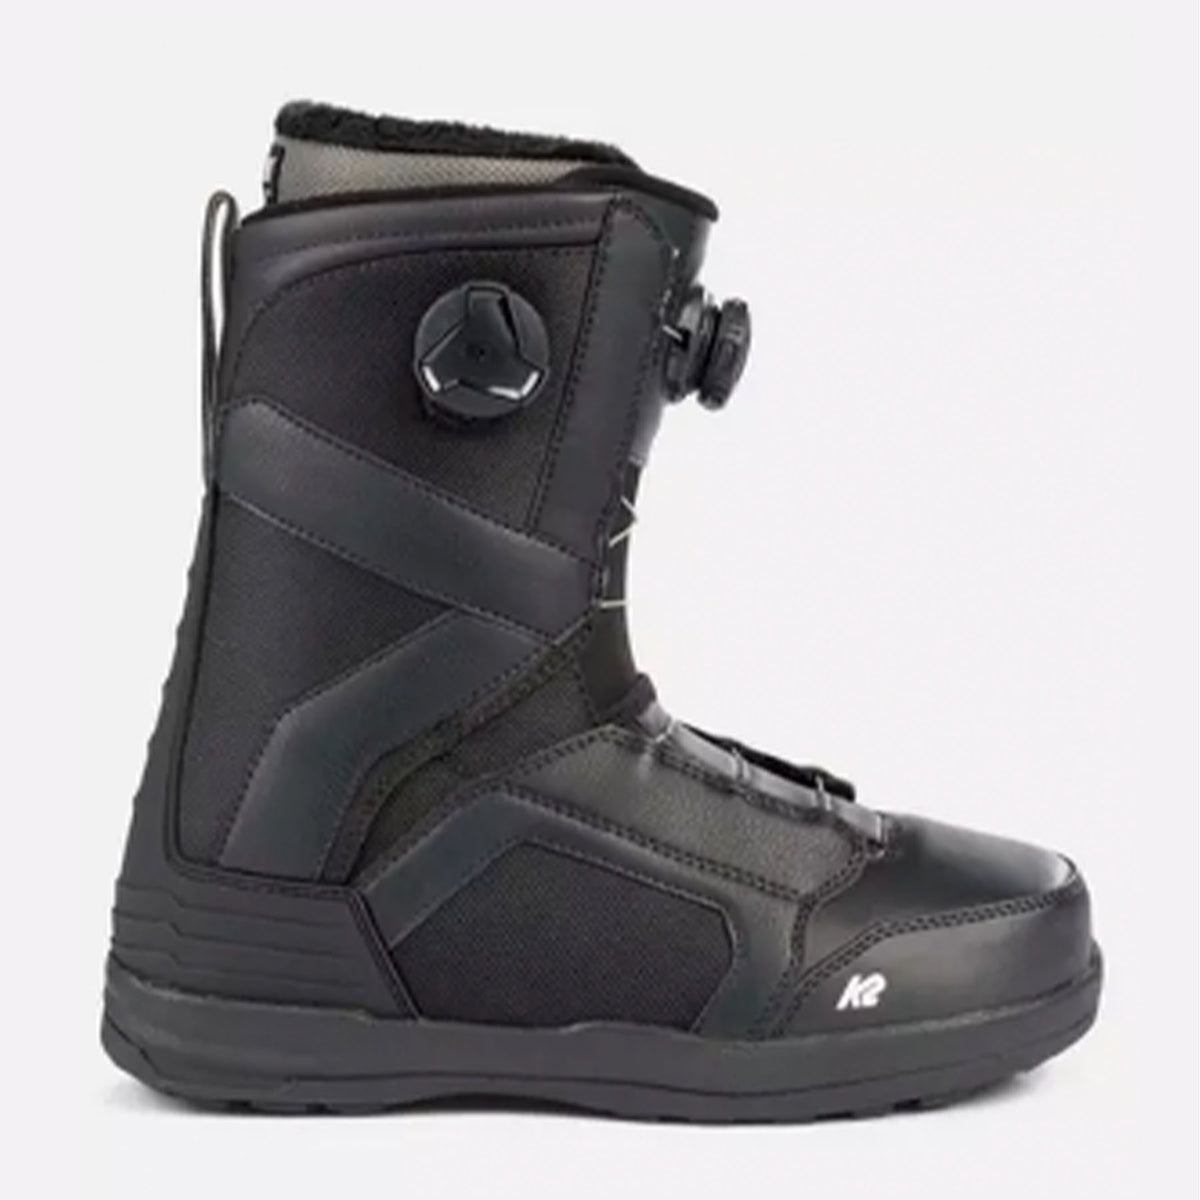 Hero image featuring a side angle view of the K2 Boundary snowboard boot in black.